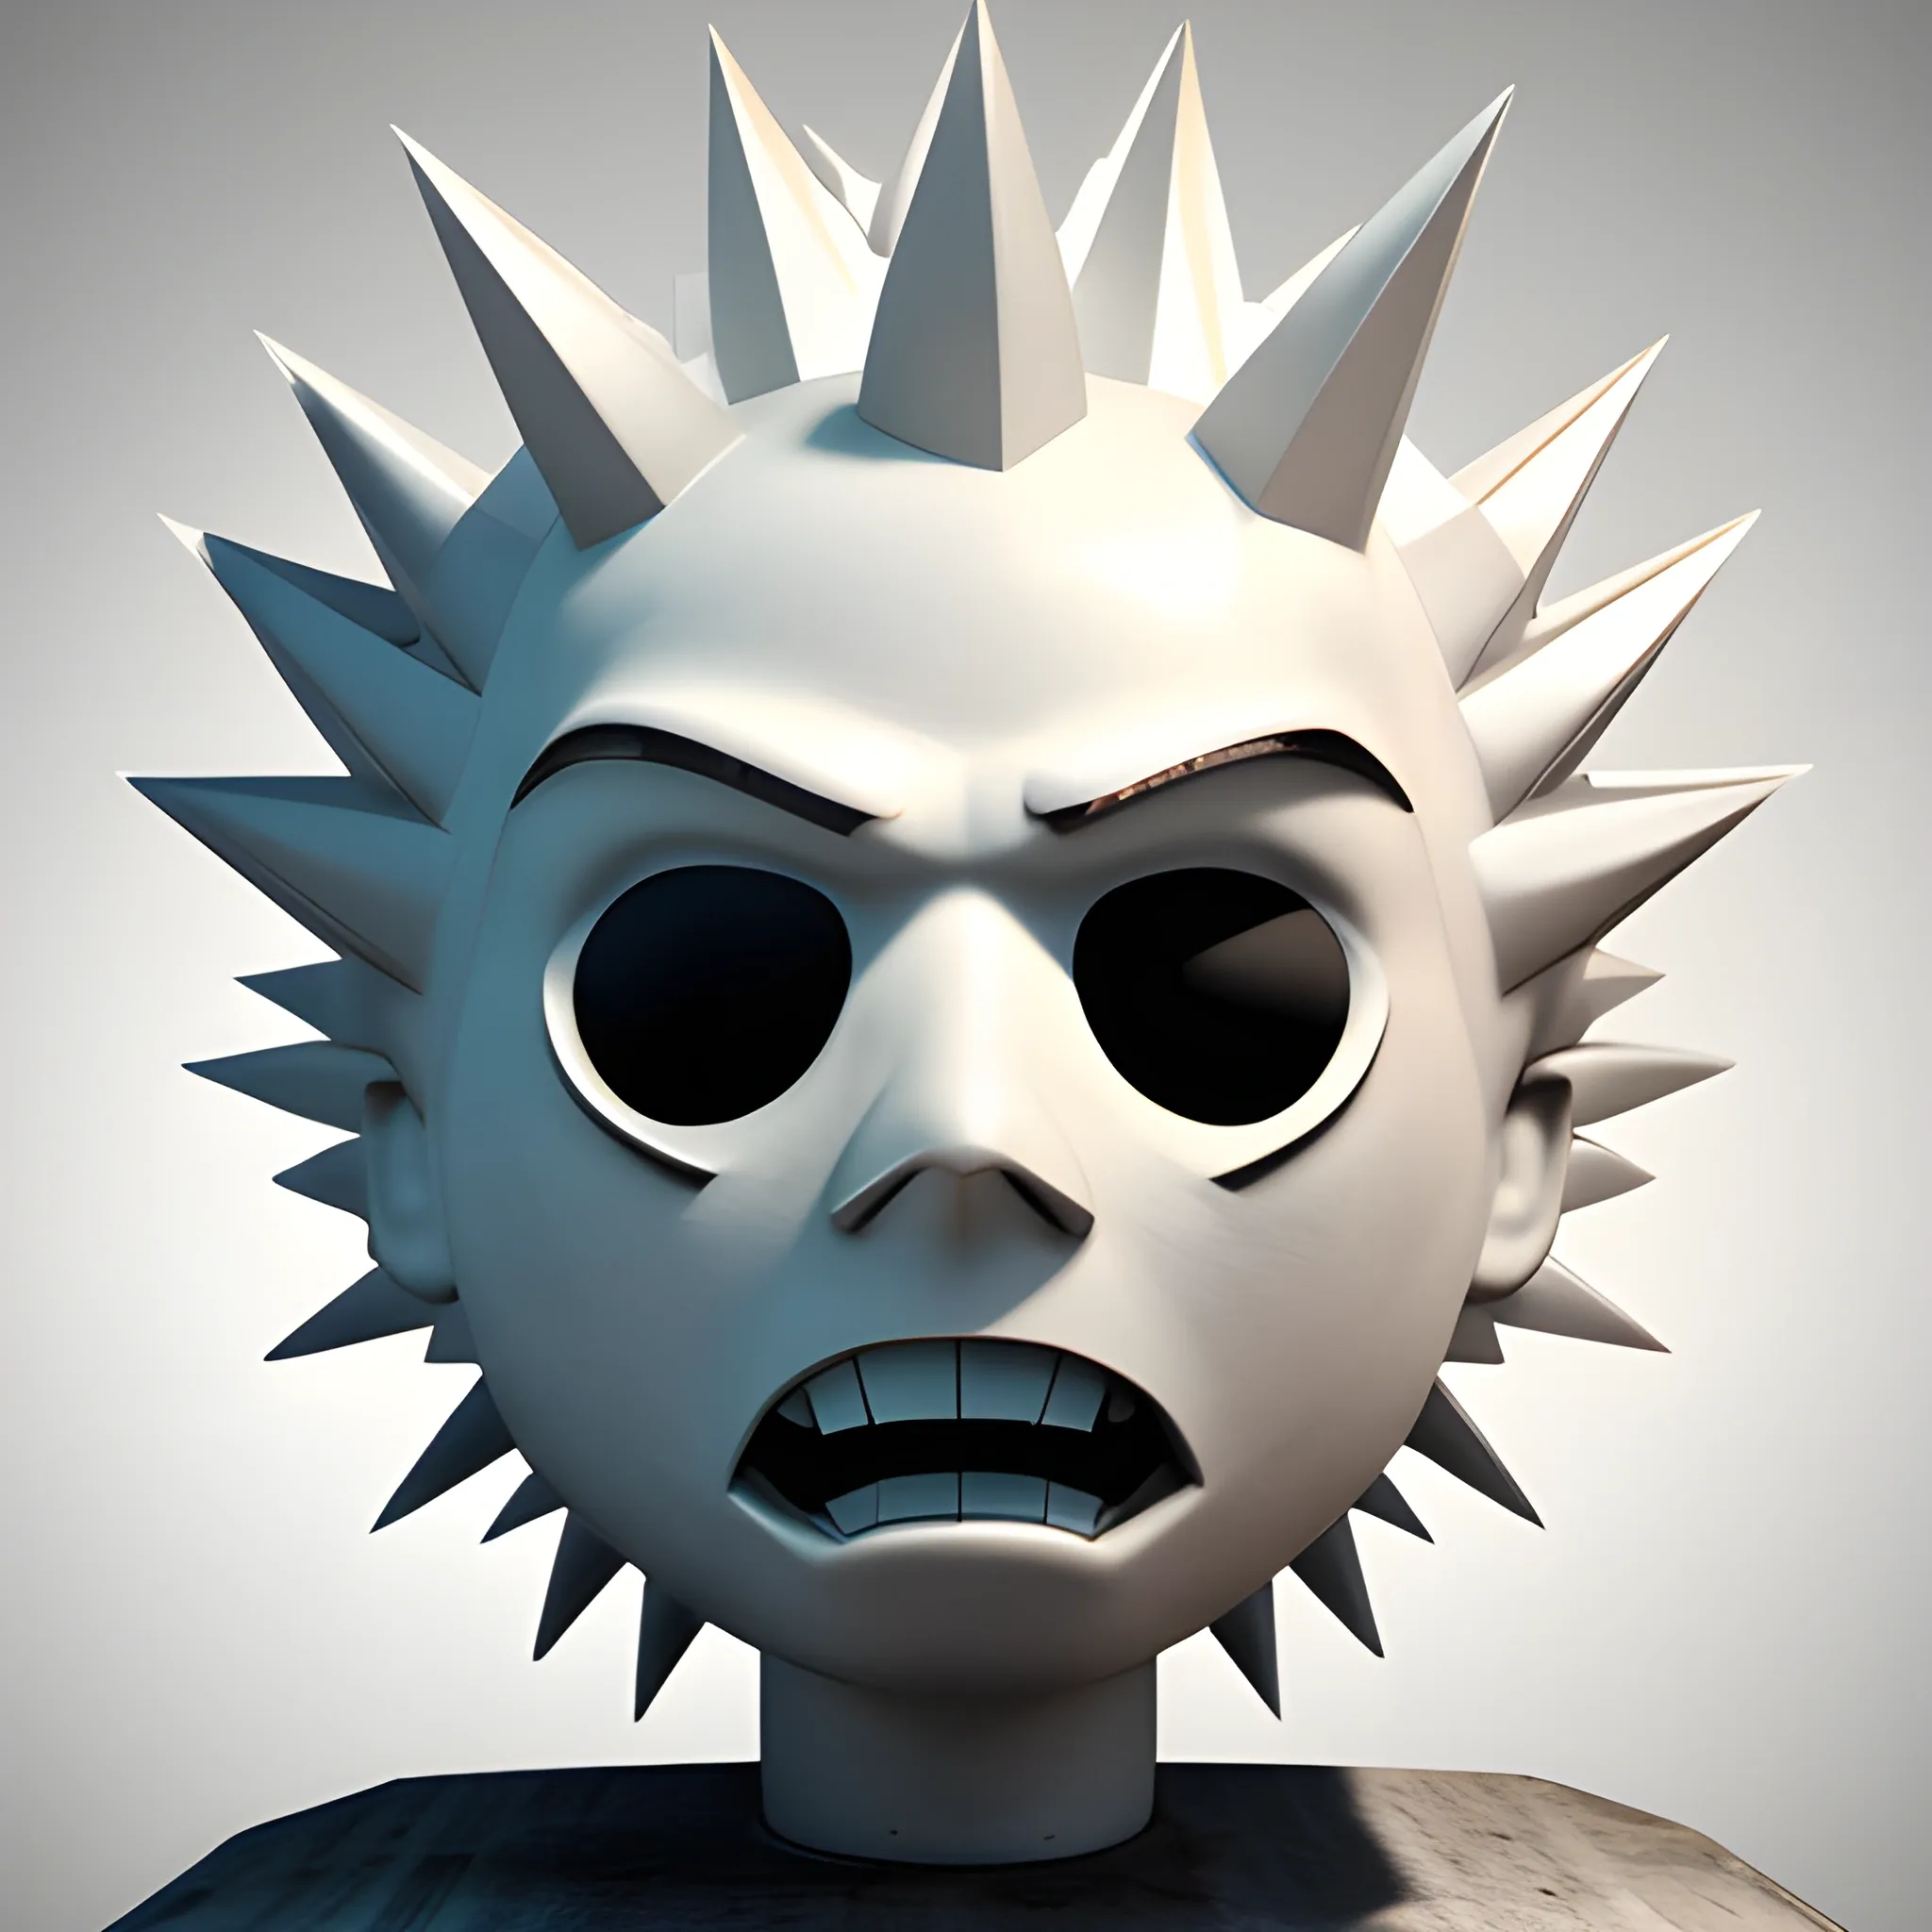 
3D White Spiky Head Punk Mascot Facing front